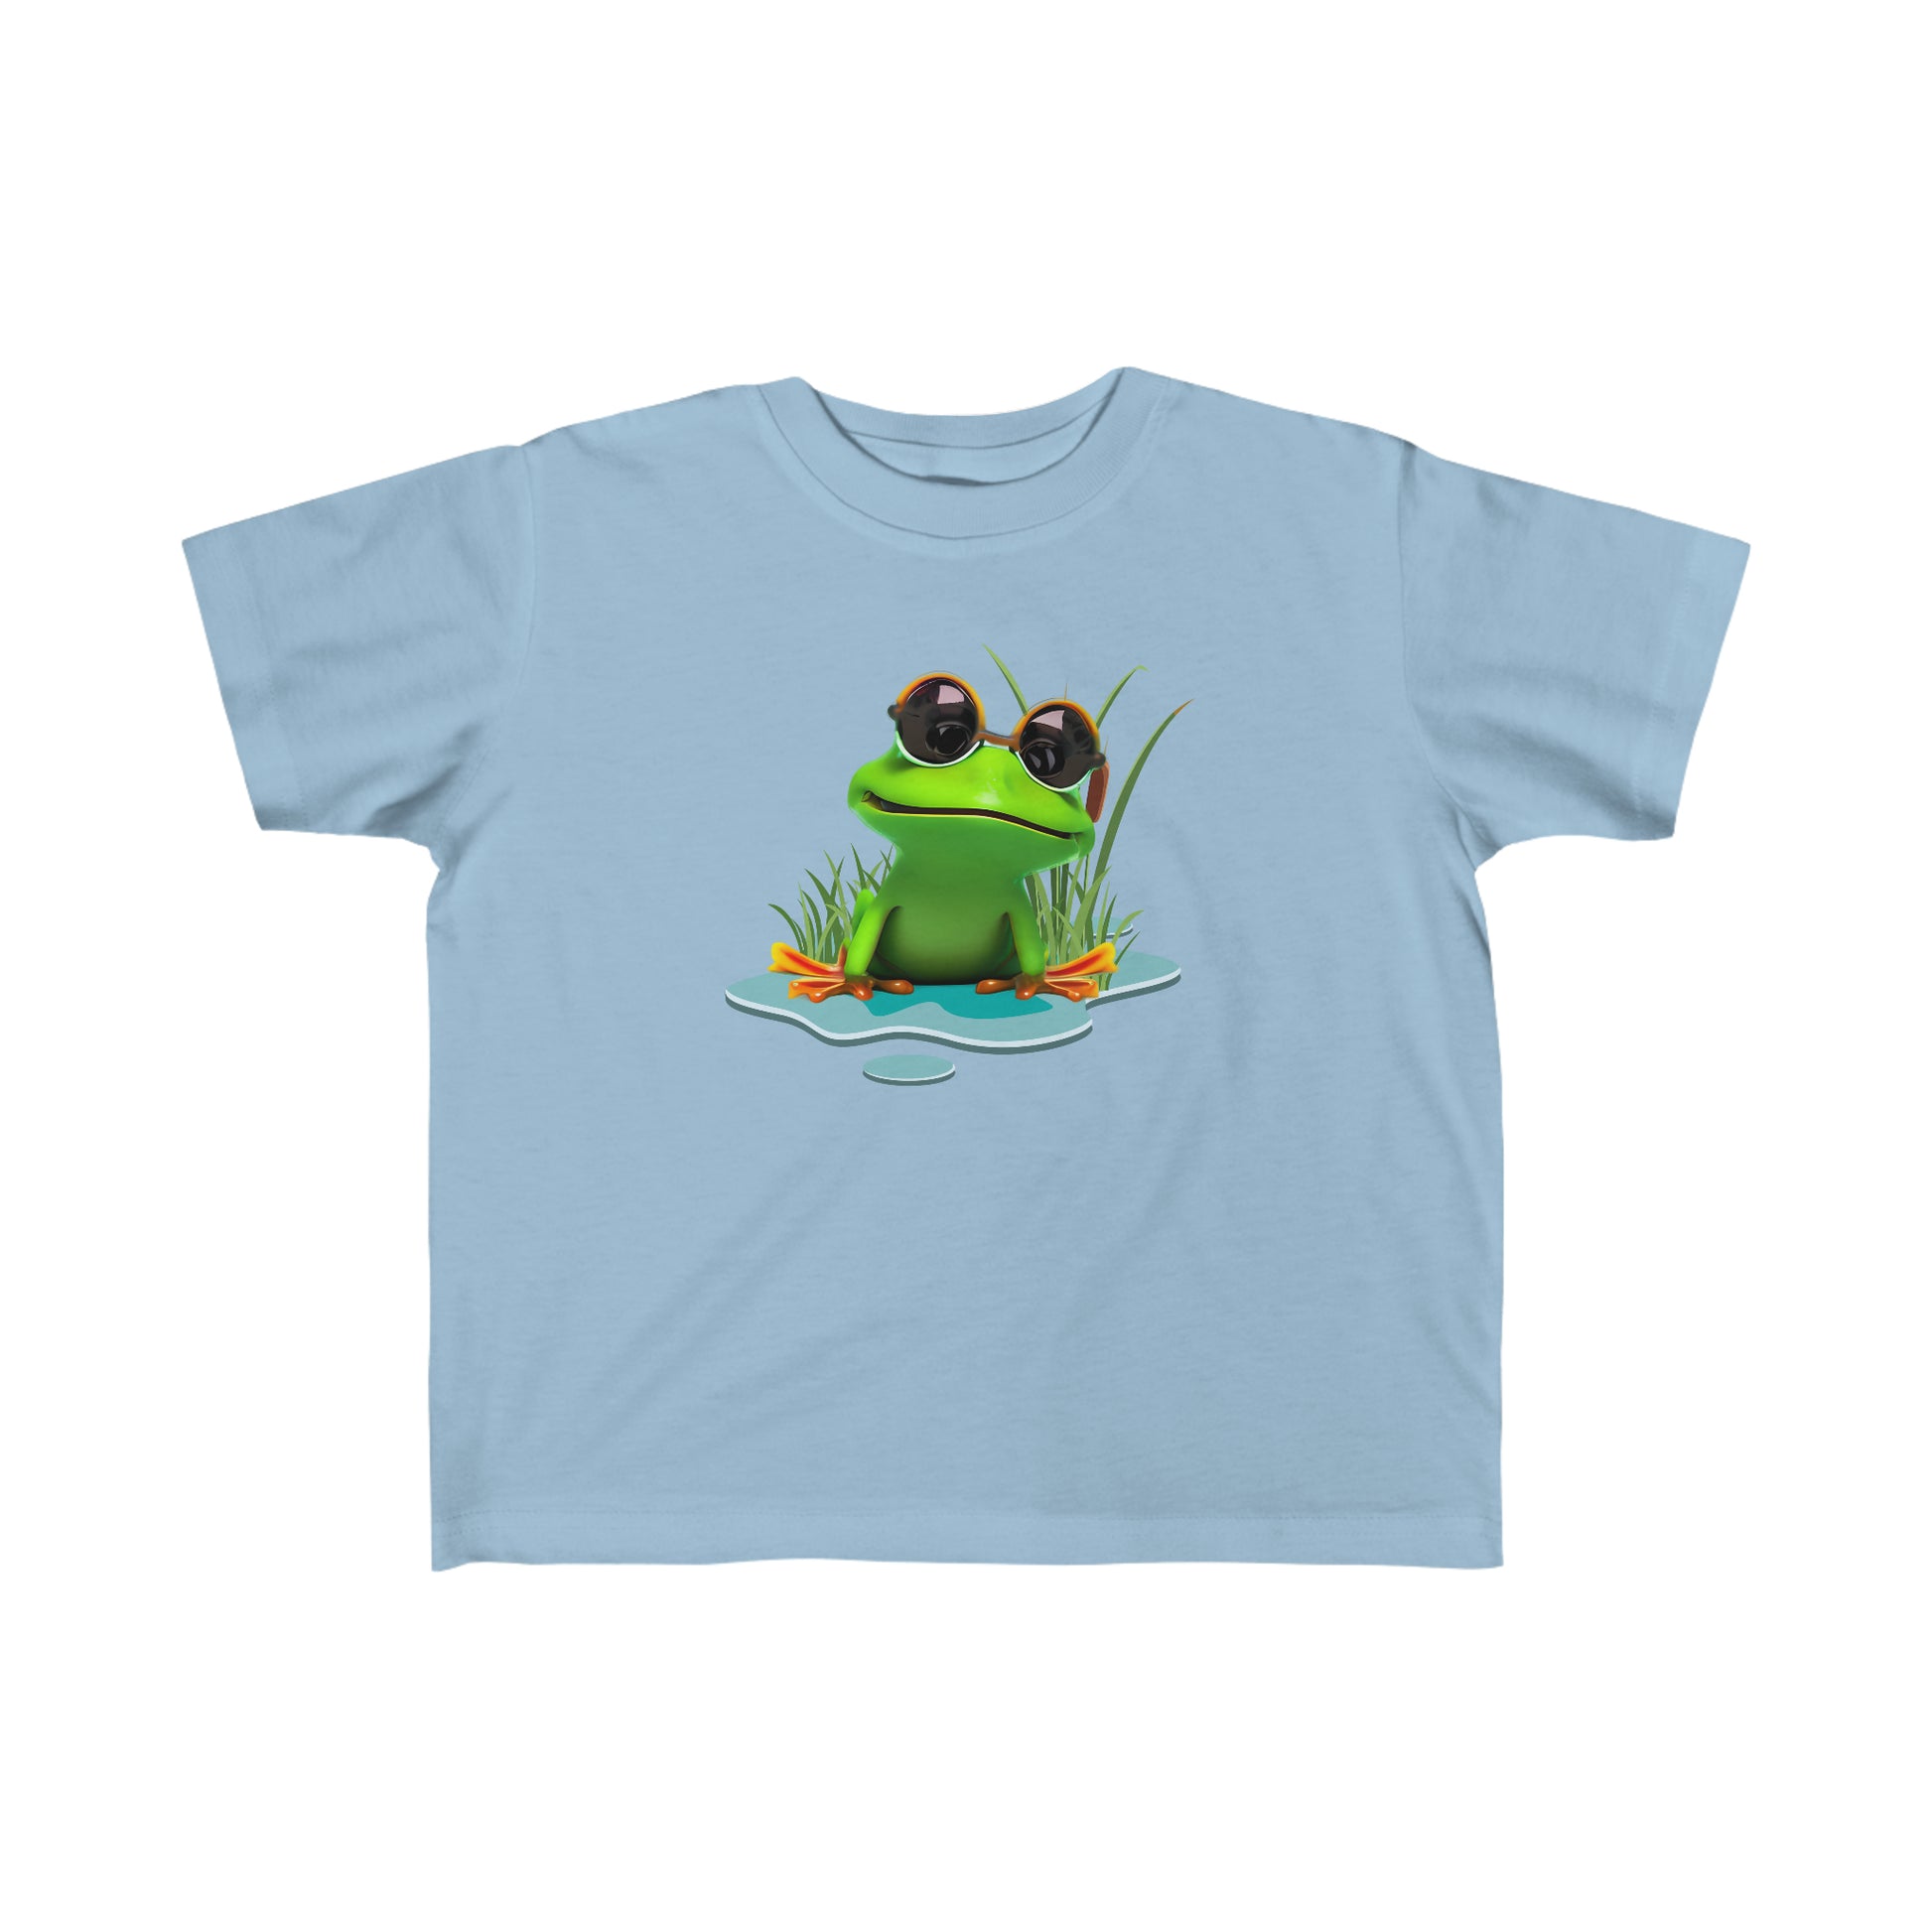 Hop to It Frog T-shirt in Light Blue